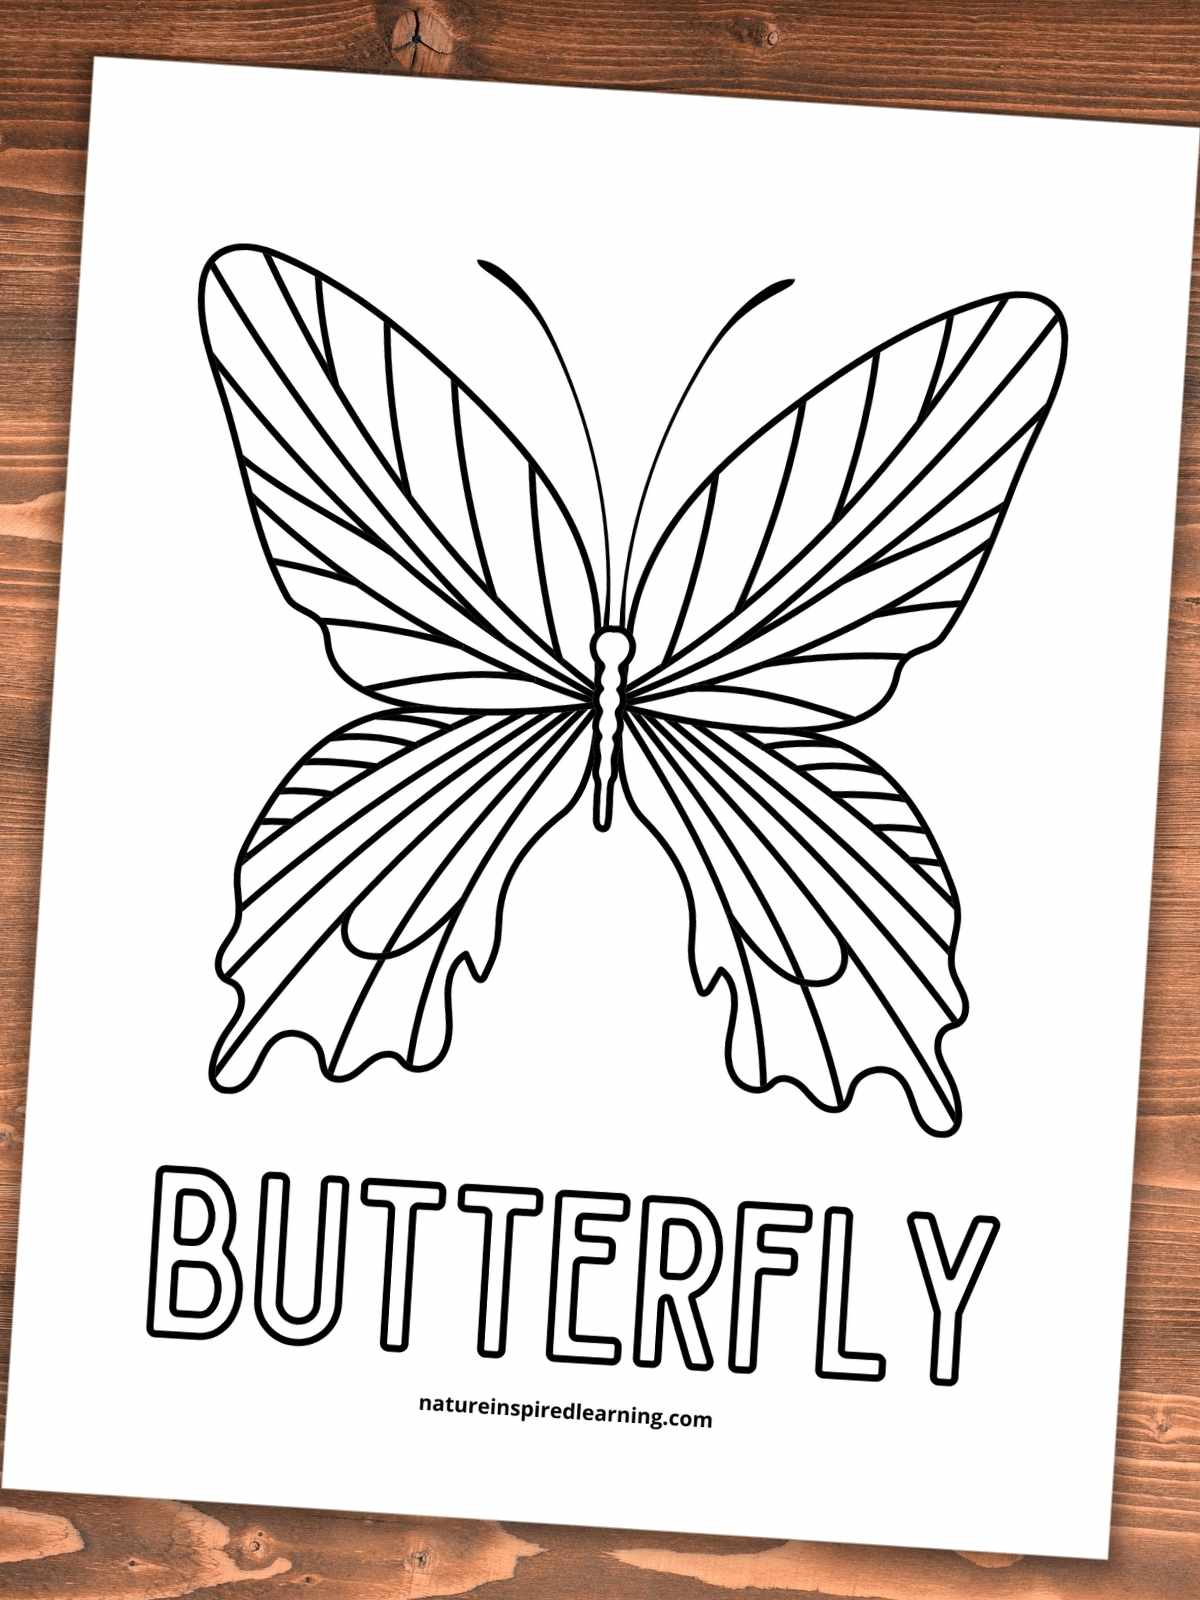 Printable with a large butterfly with big wings and the word butterfly written in all caps below on a wooden background